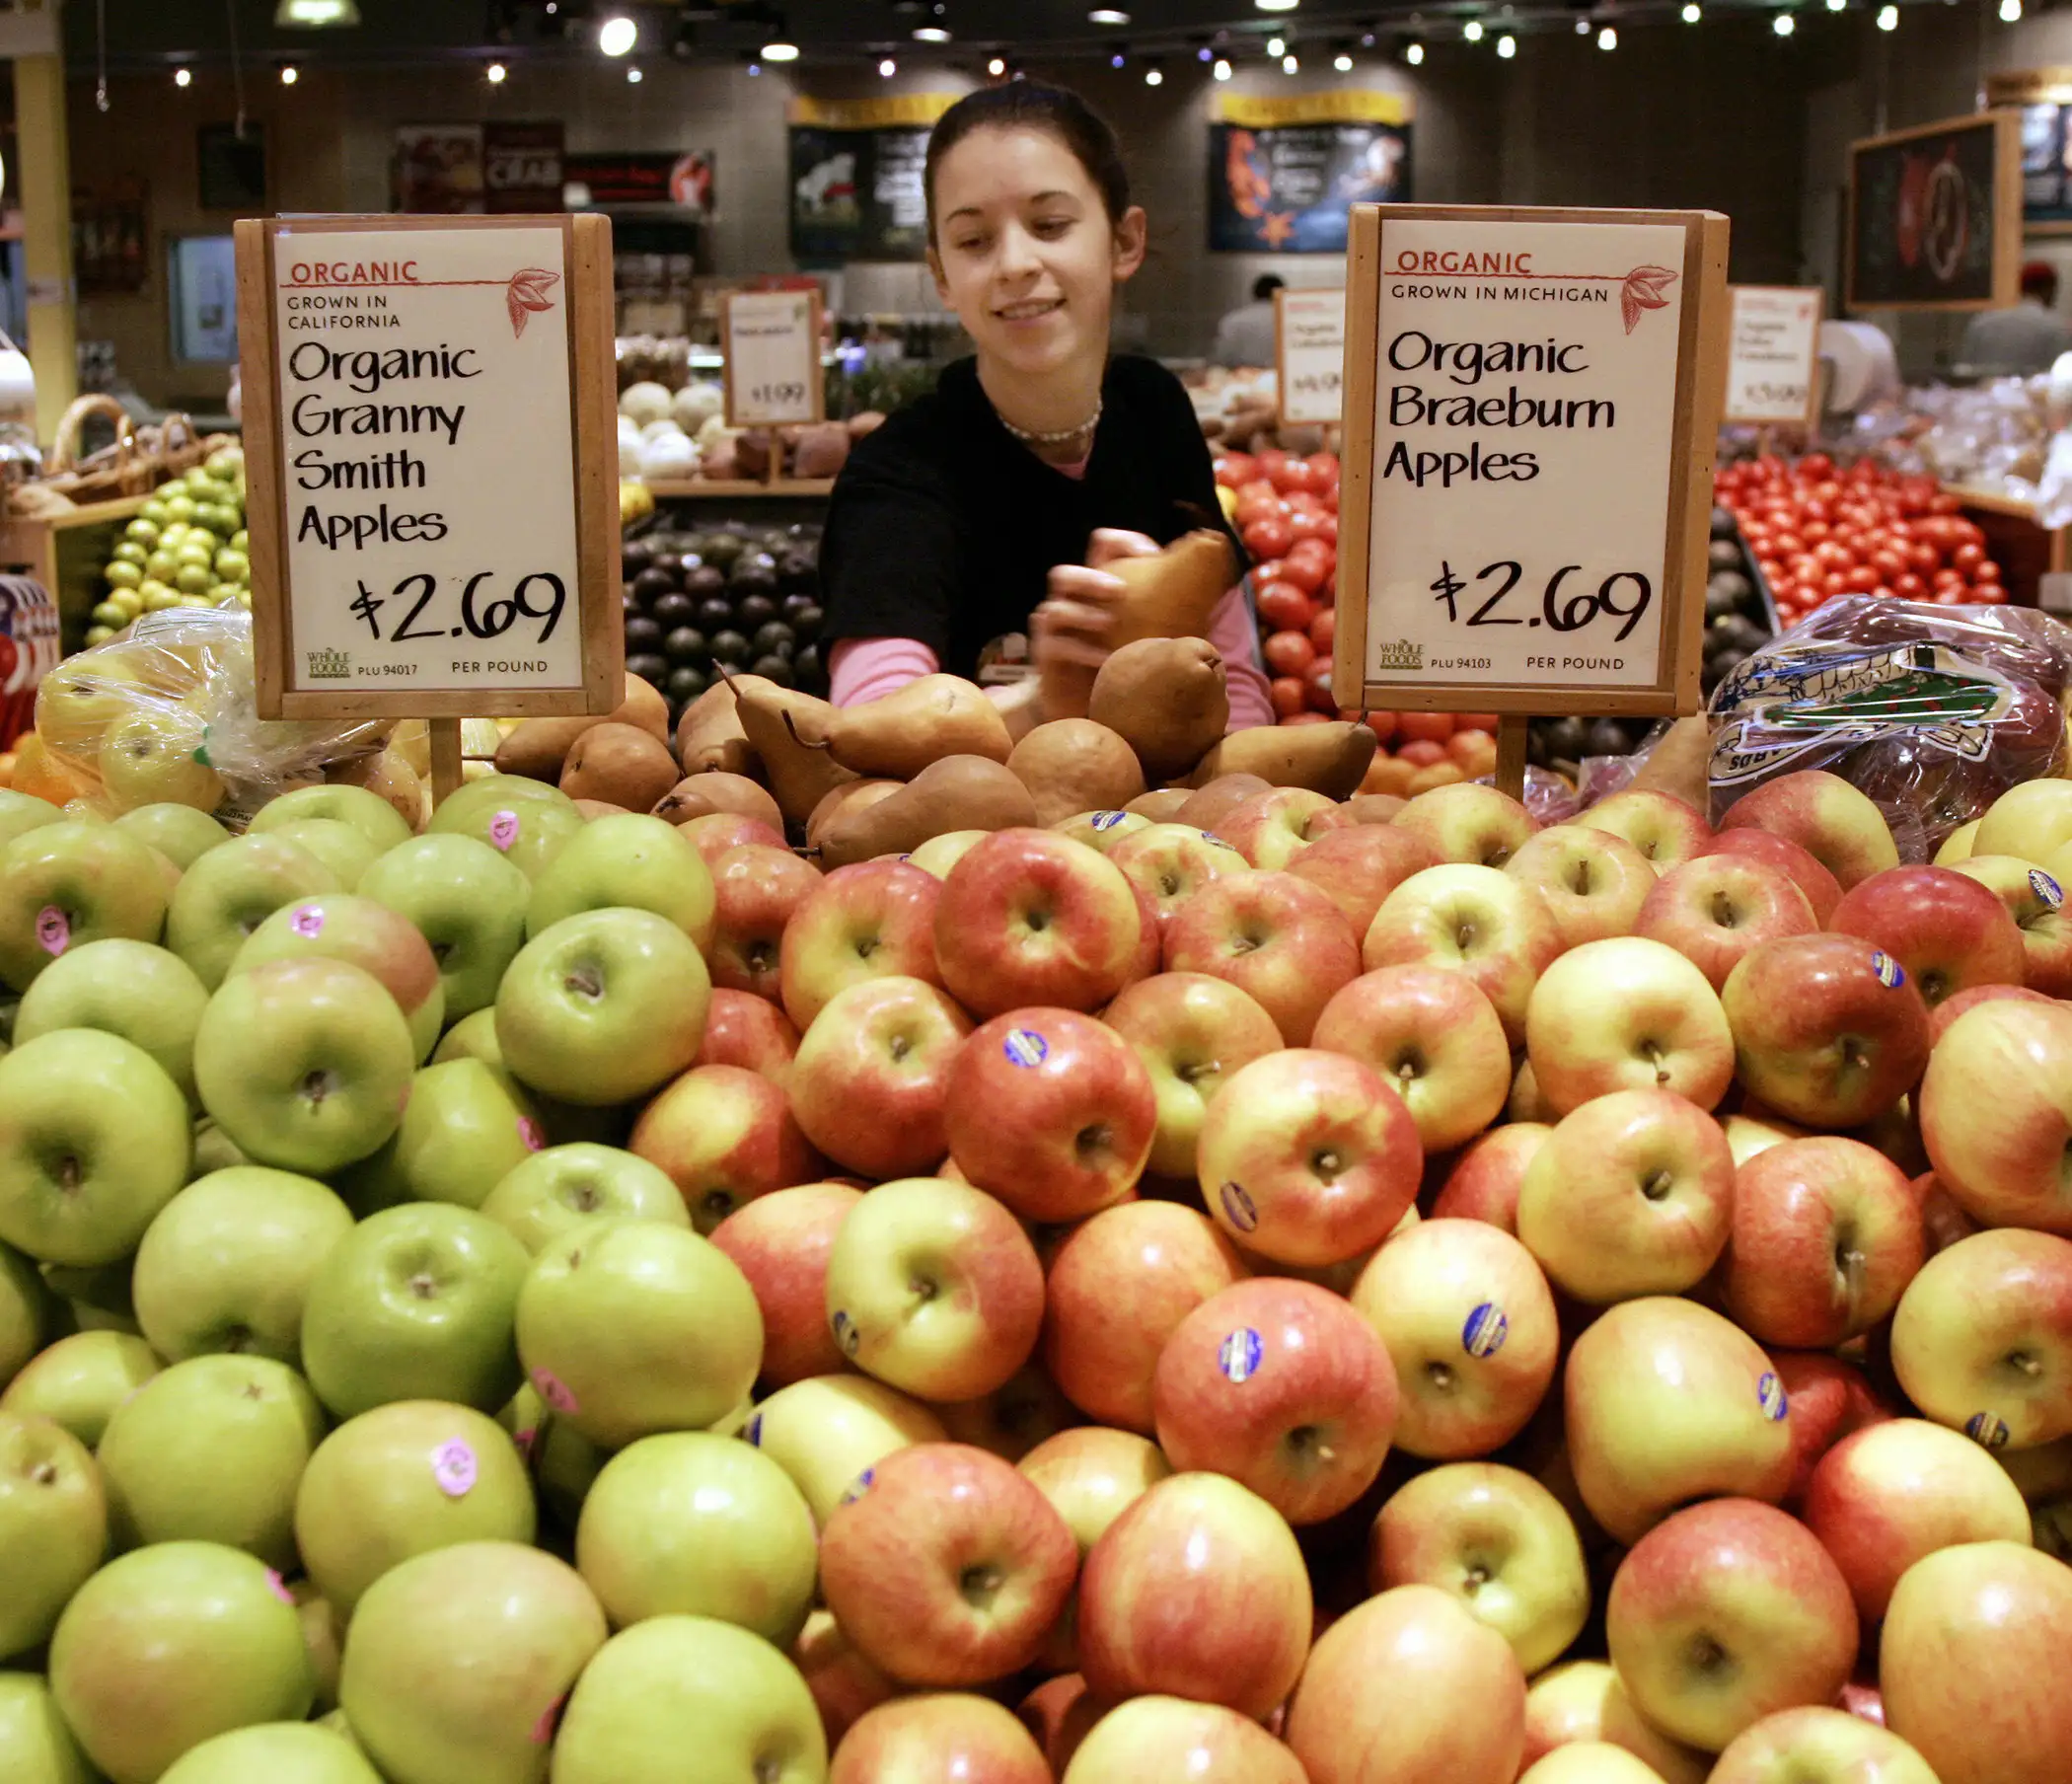 Organic produce sections in The Whole Foods Market in Willowbrook, Illinois